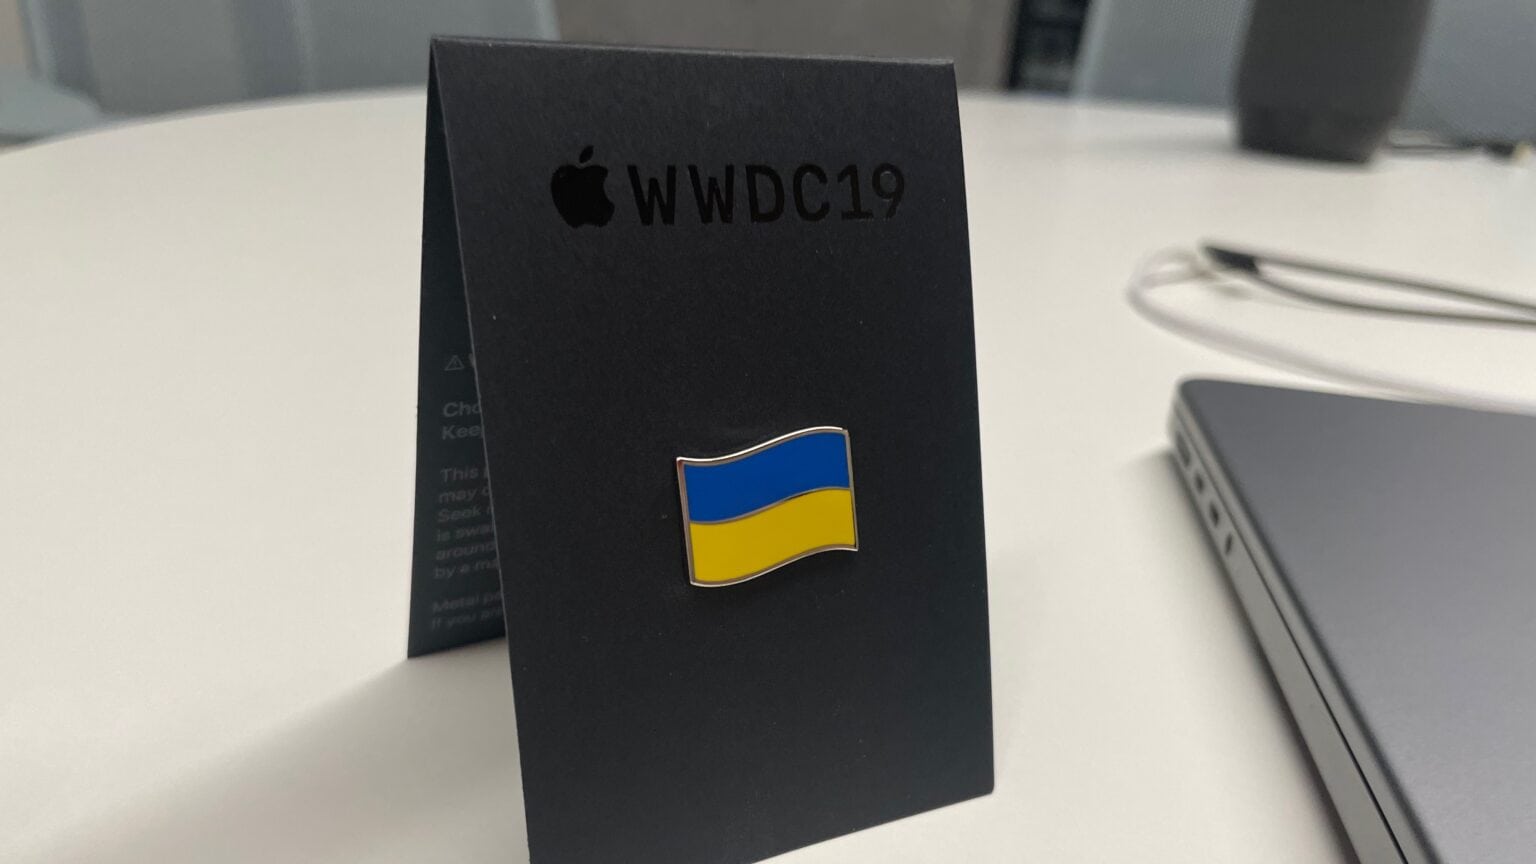 Send aid to Ukraine for chance to win rare WWDC19 pin